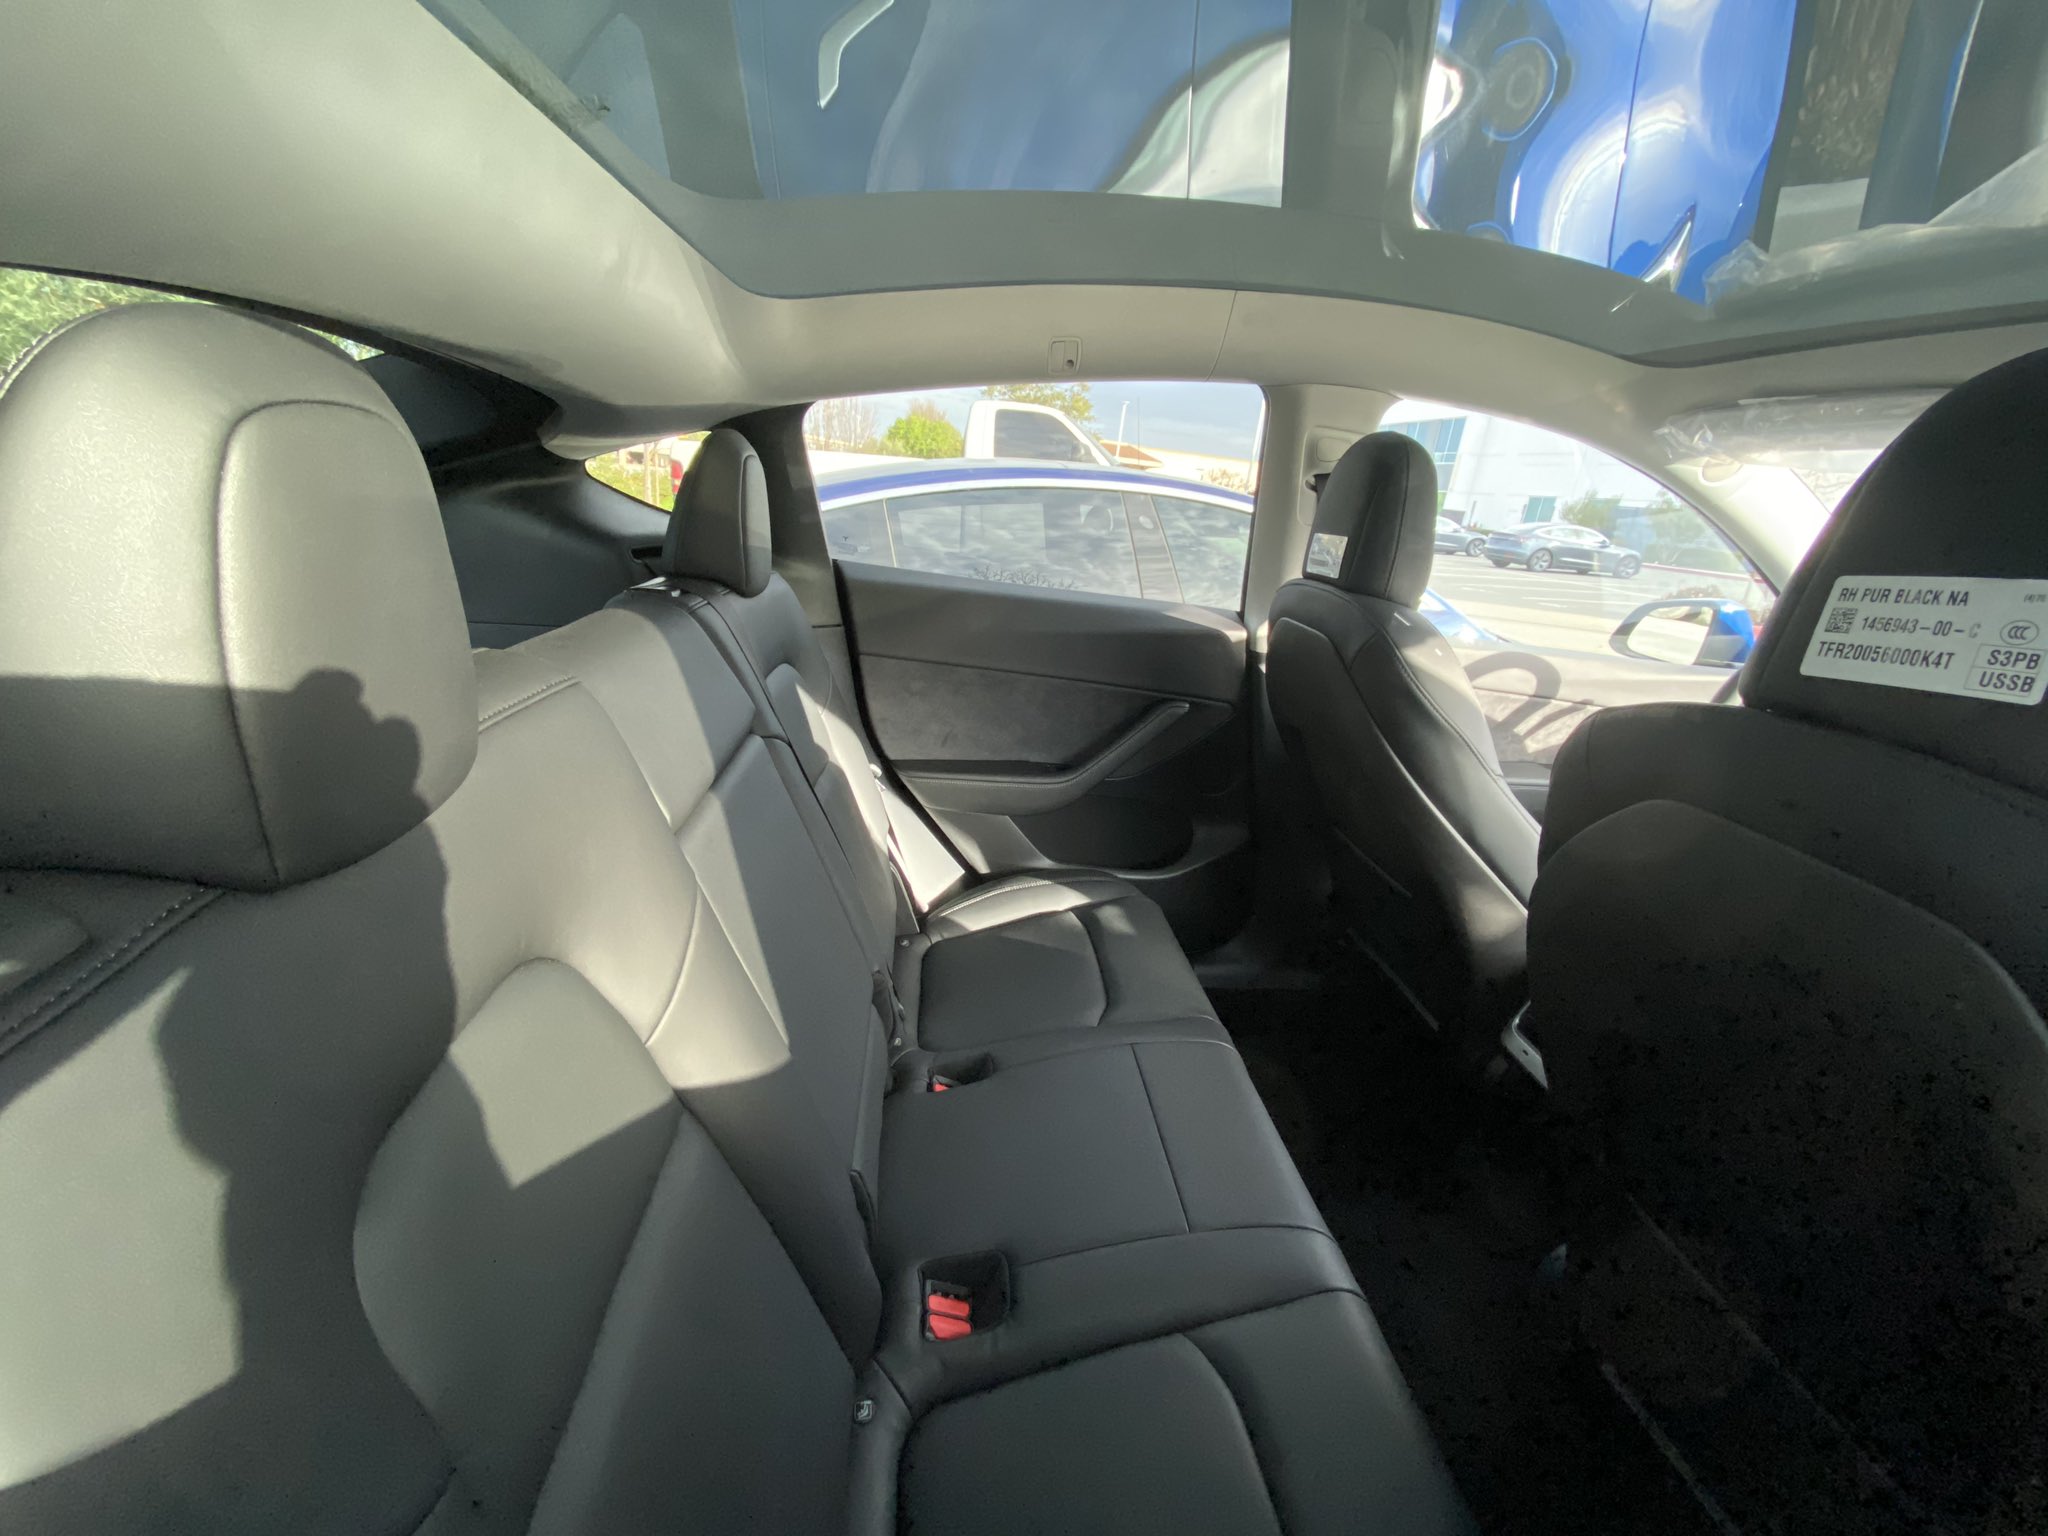 Detailed pictures of the Model Y interior have leaked at last